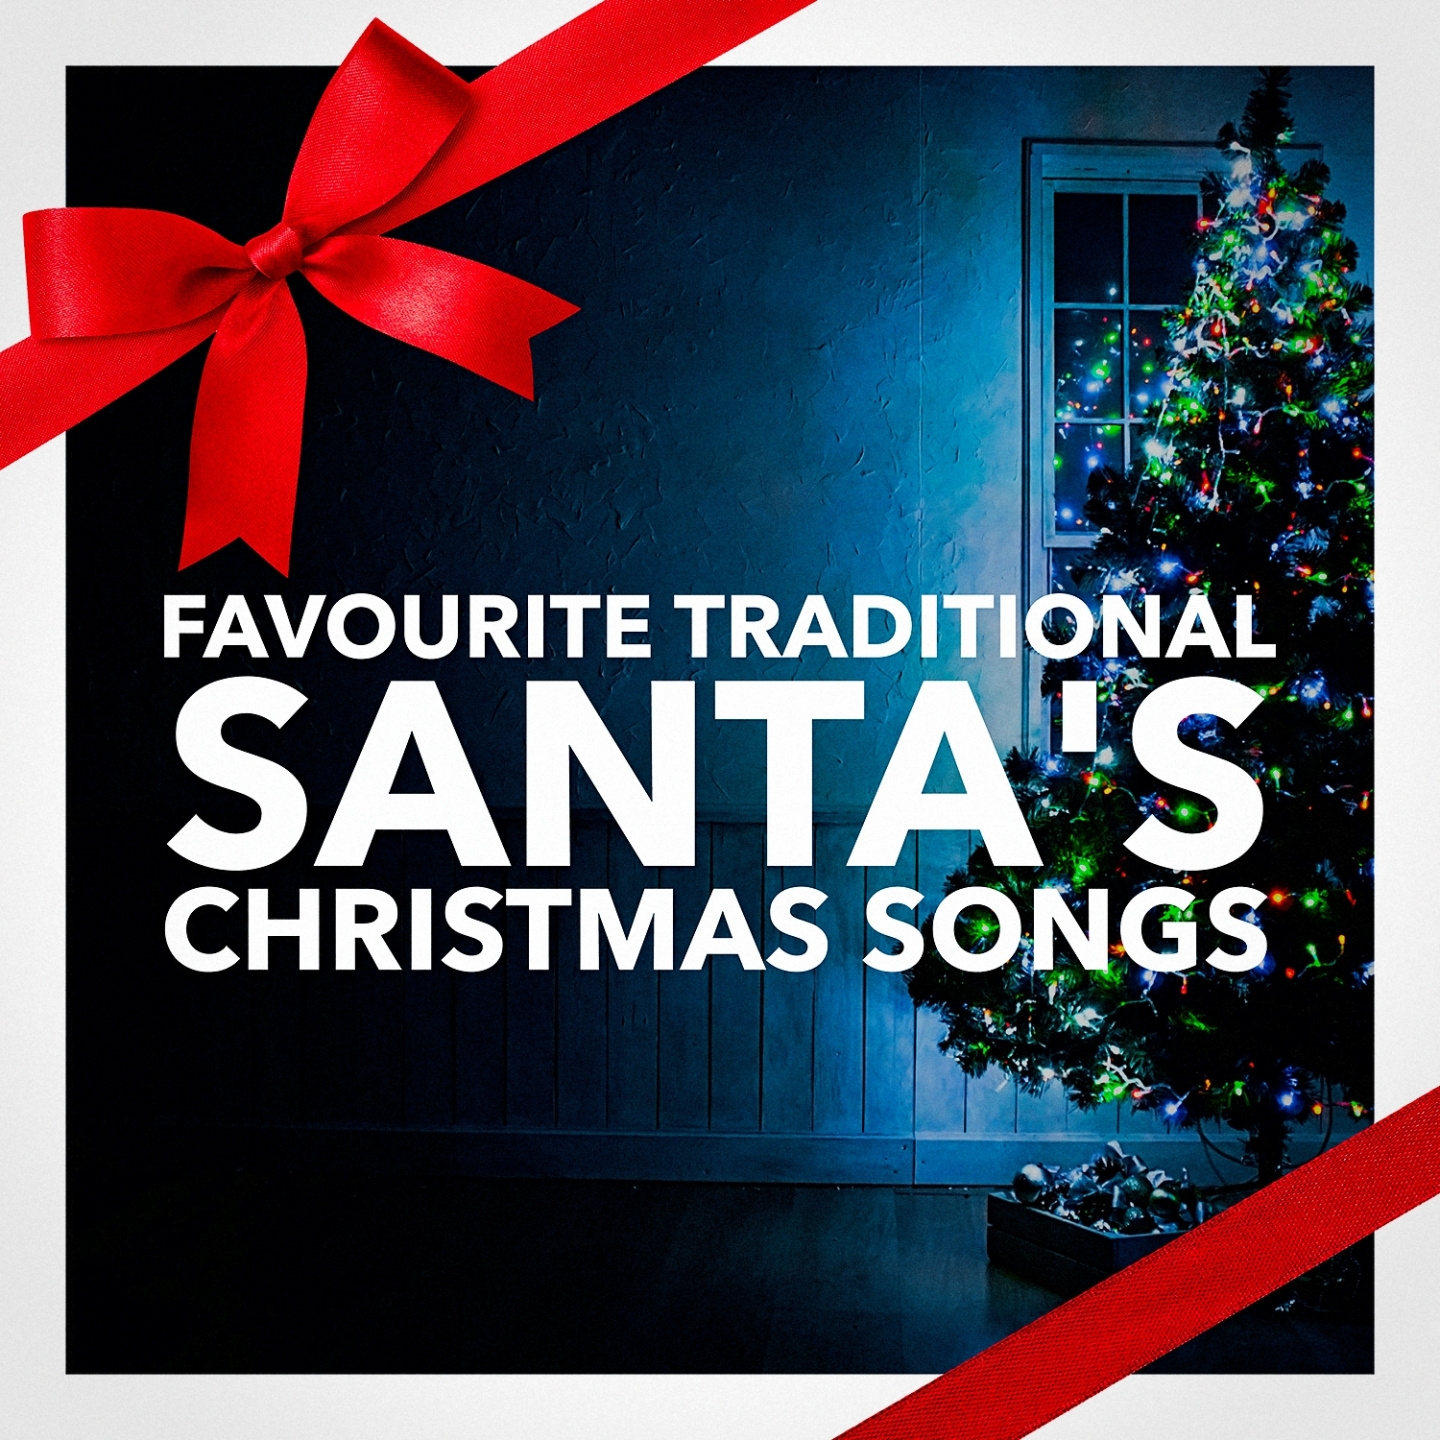 Santa's Favourite Traditional Christmas Songs